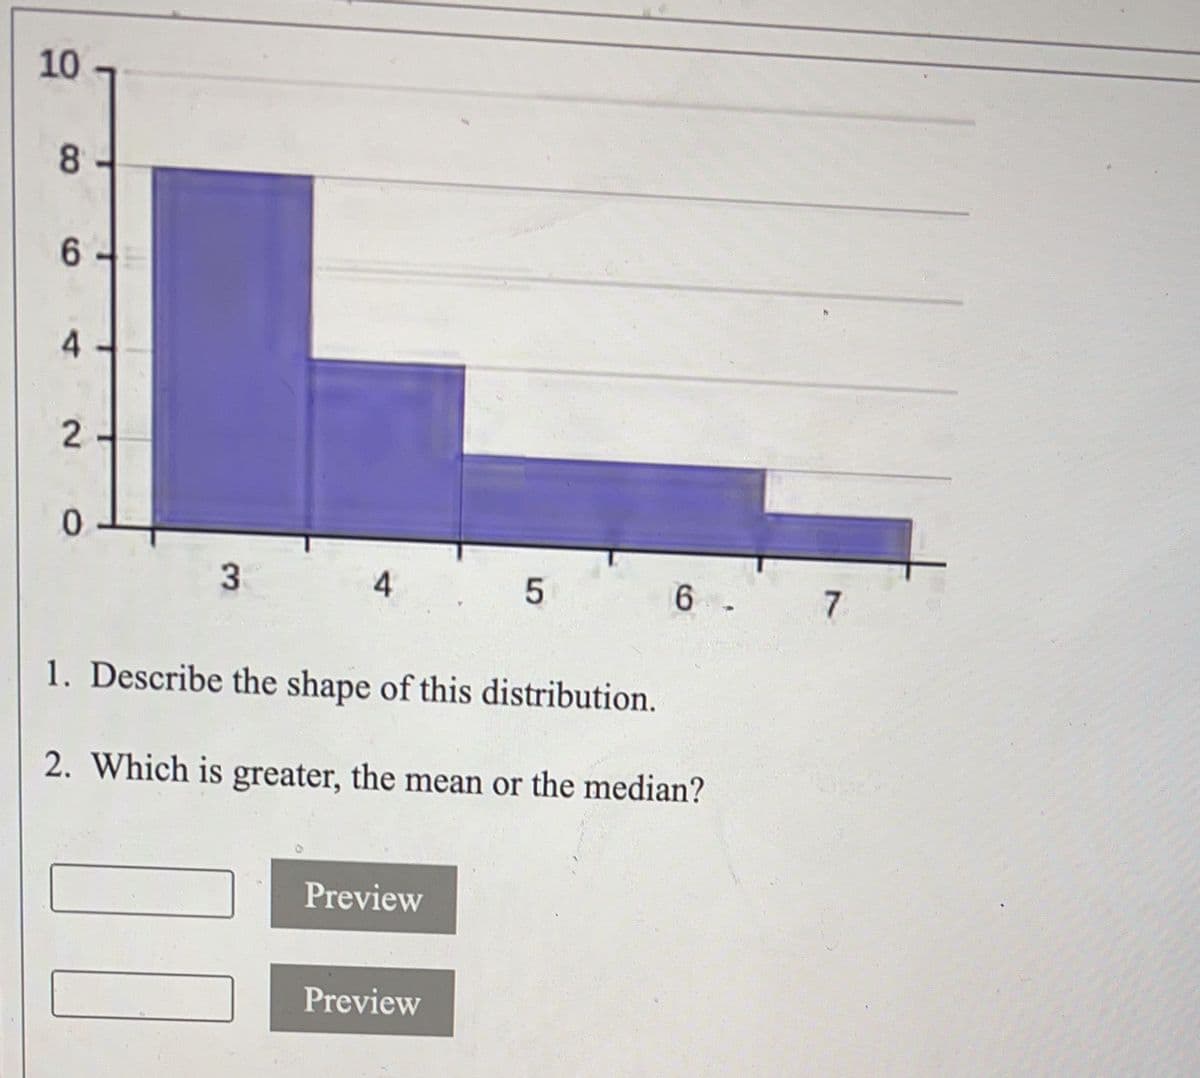 10
8
6
4
2
0
3
4
00
1. Describe the shape of this distribution.
2. Which is greater, the mean or the median?
Preview
5
Preview
6
7